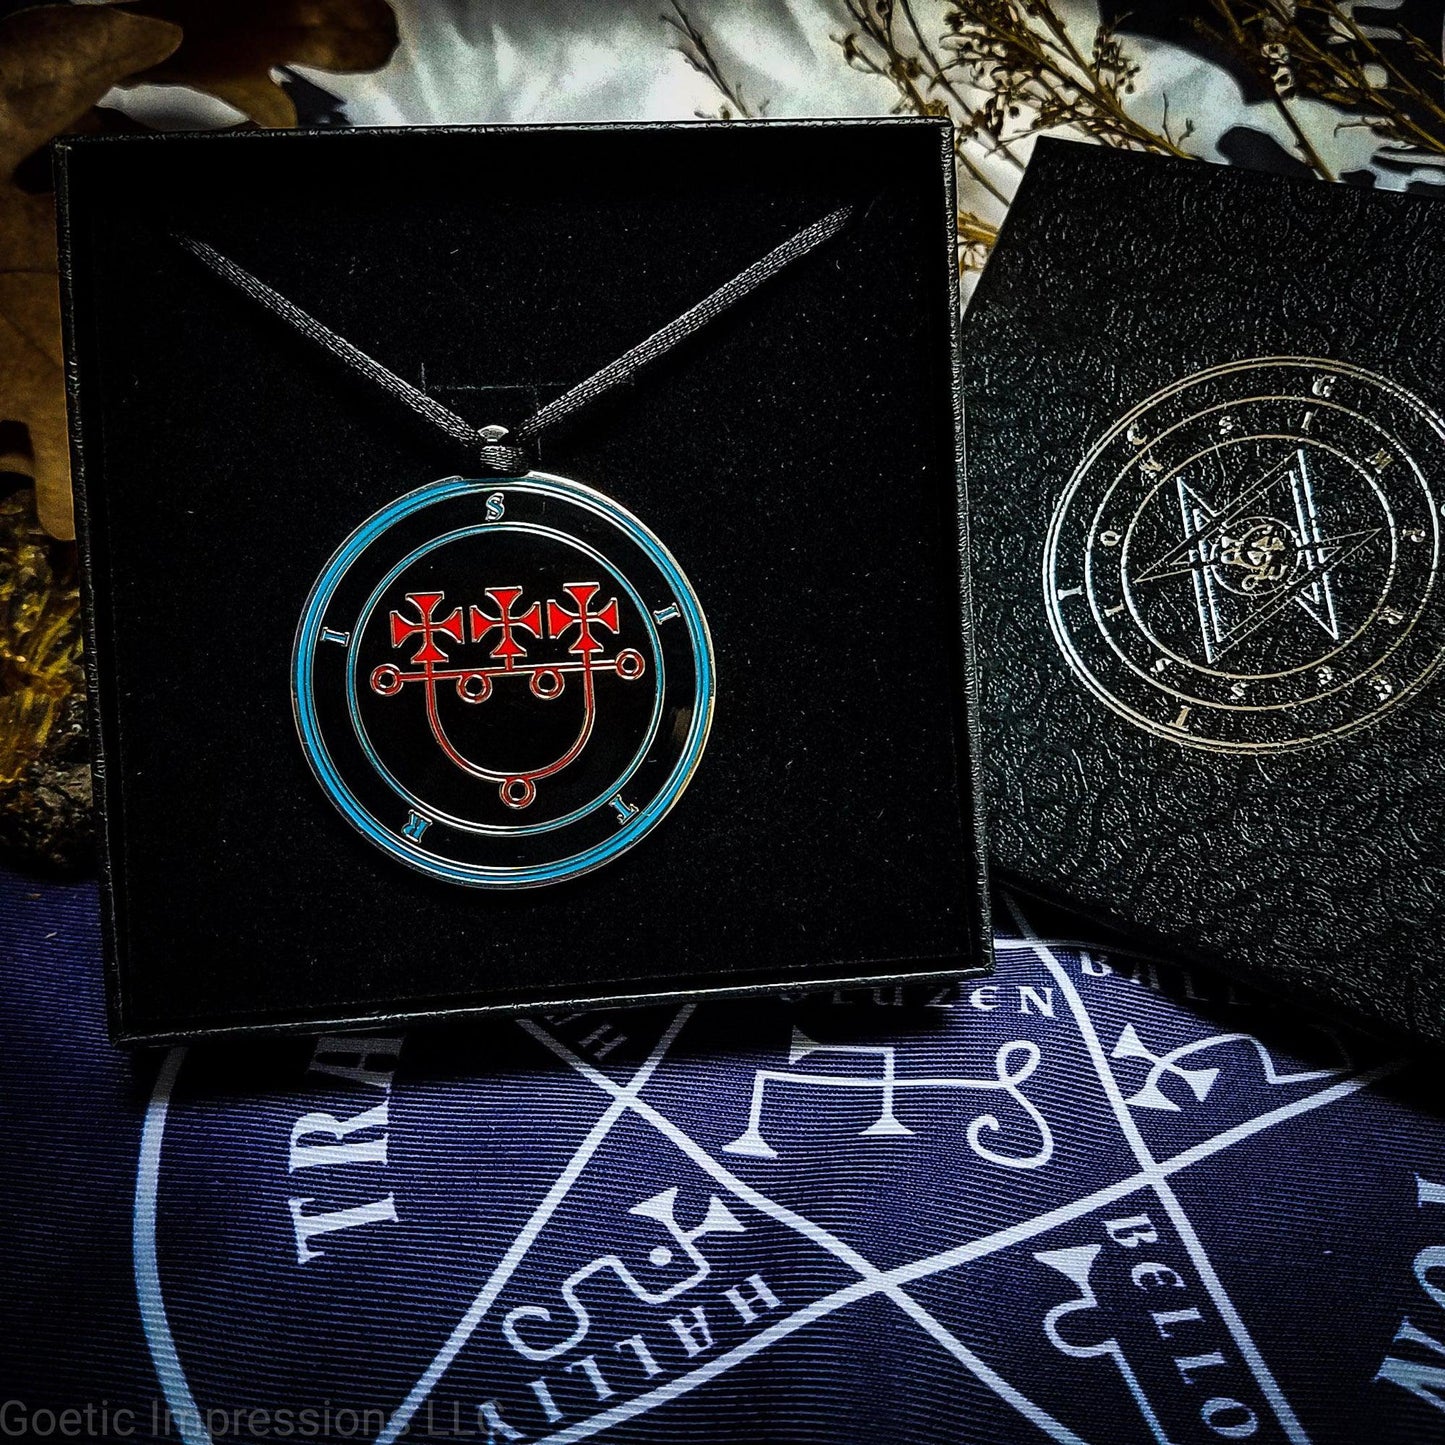 A Sitri medallion in a Goetic Impressions gift box. The medallion has a satin cord necklace. The sigil on the talisman is red with blue circles and text. The gift box is on a pentacle of solomon altar cloth.